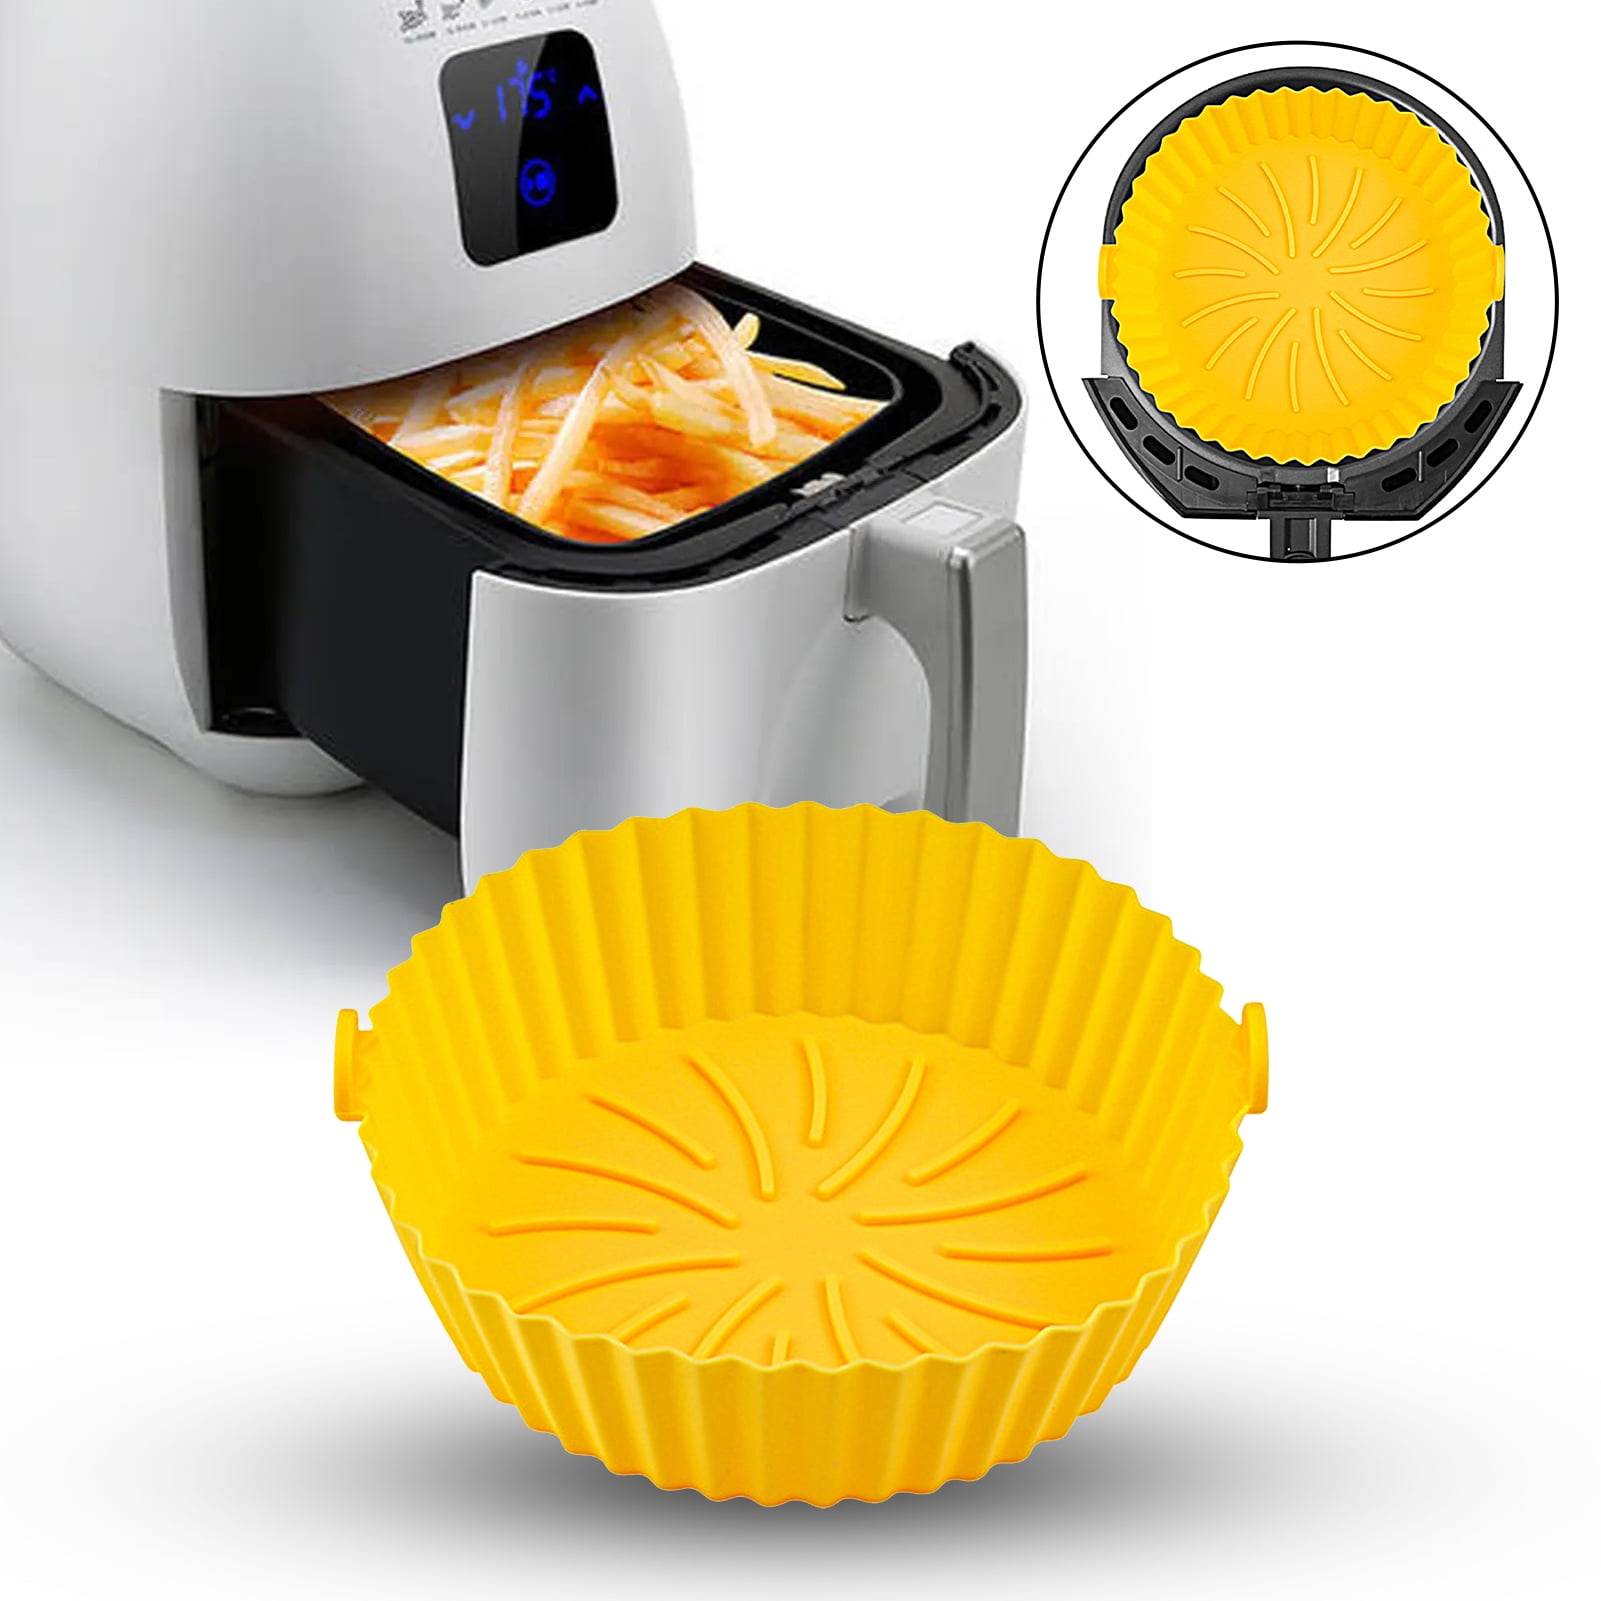 AKSDTH 2 Pack Air Fryer Silicone Liners for 5 QT or Bigger,Silicone Ai